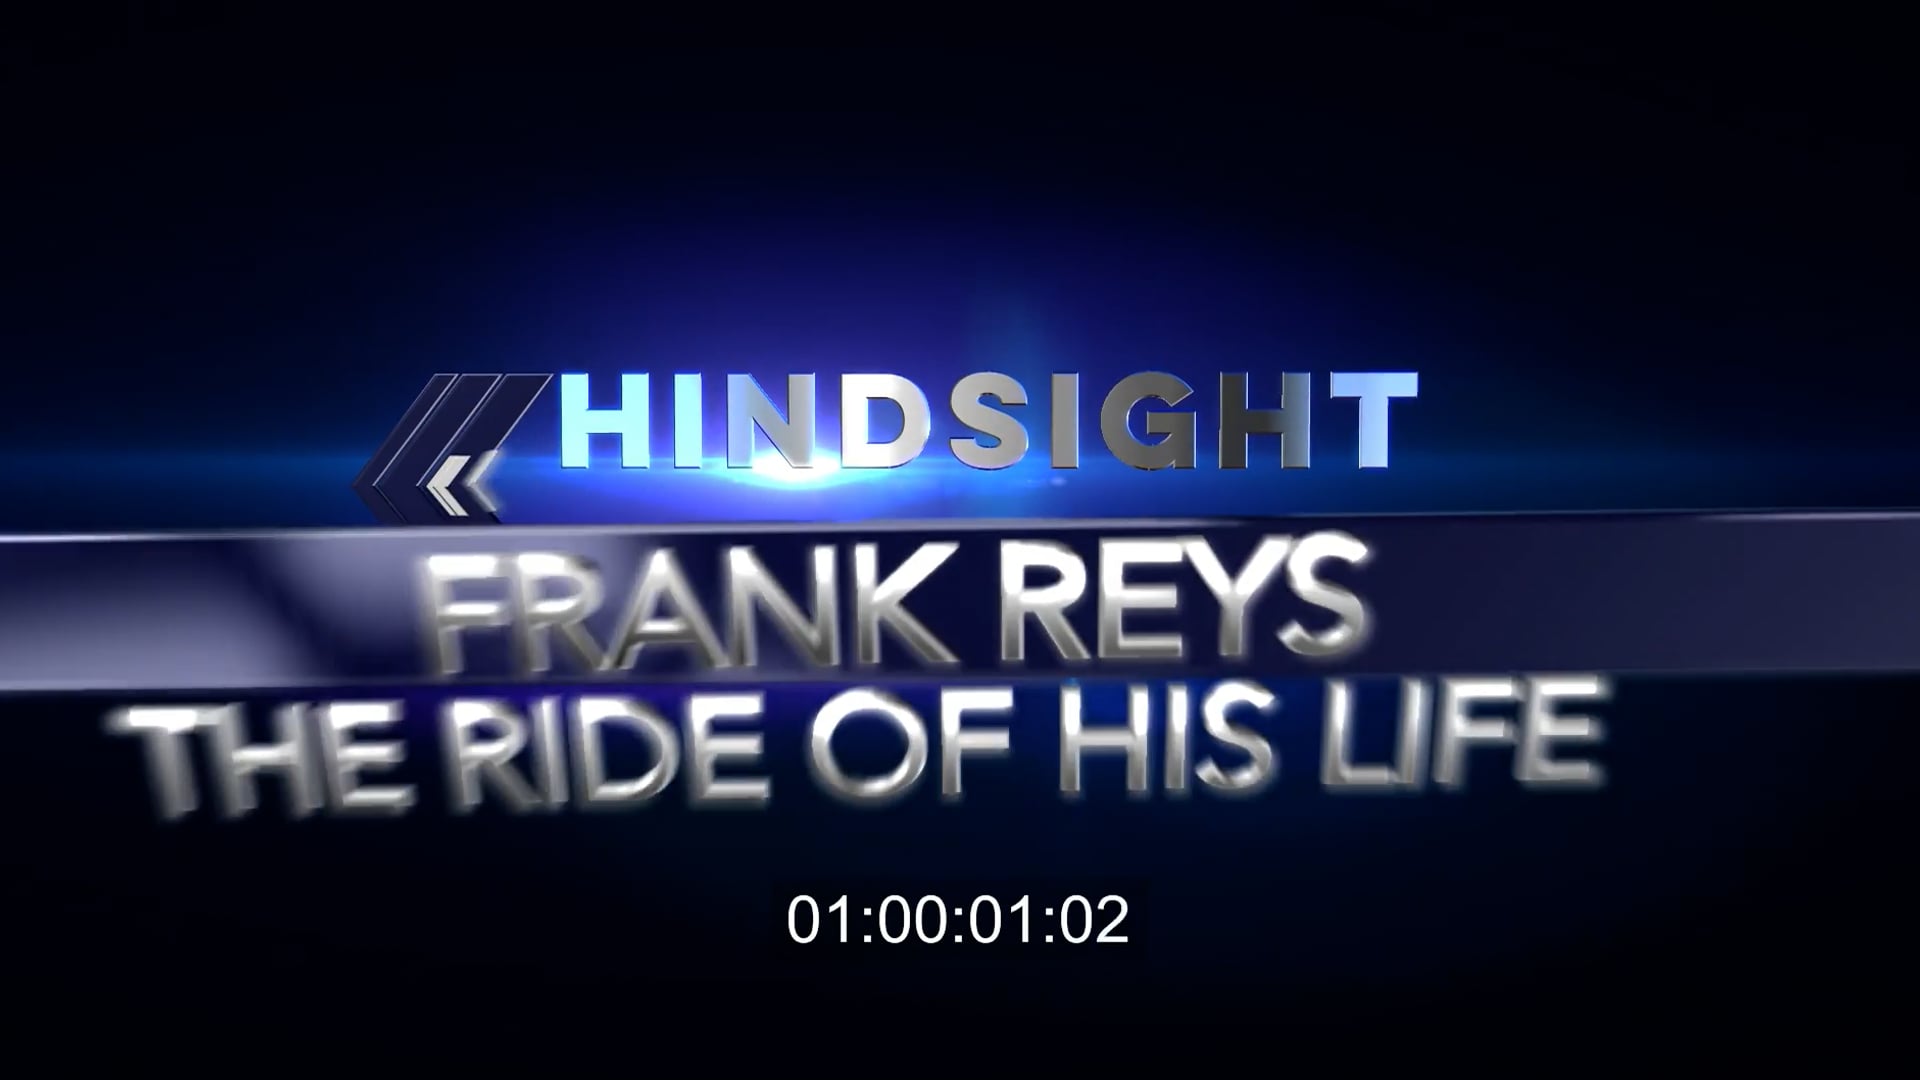 Frank Reys - The Ride Of His Life